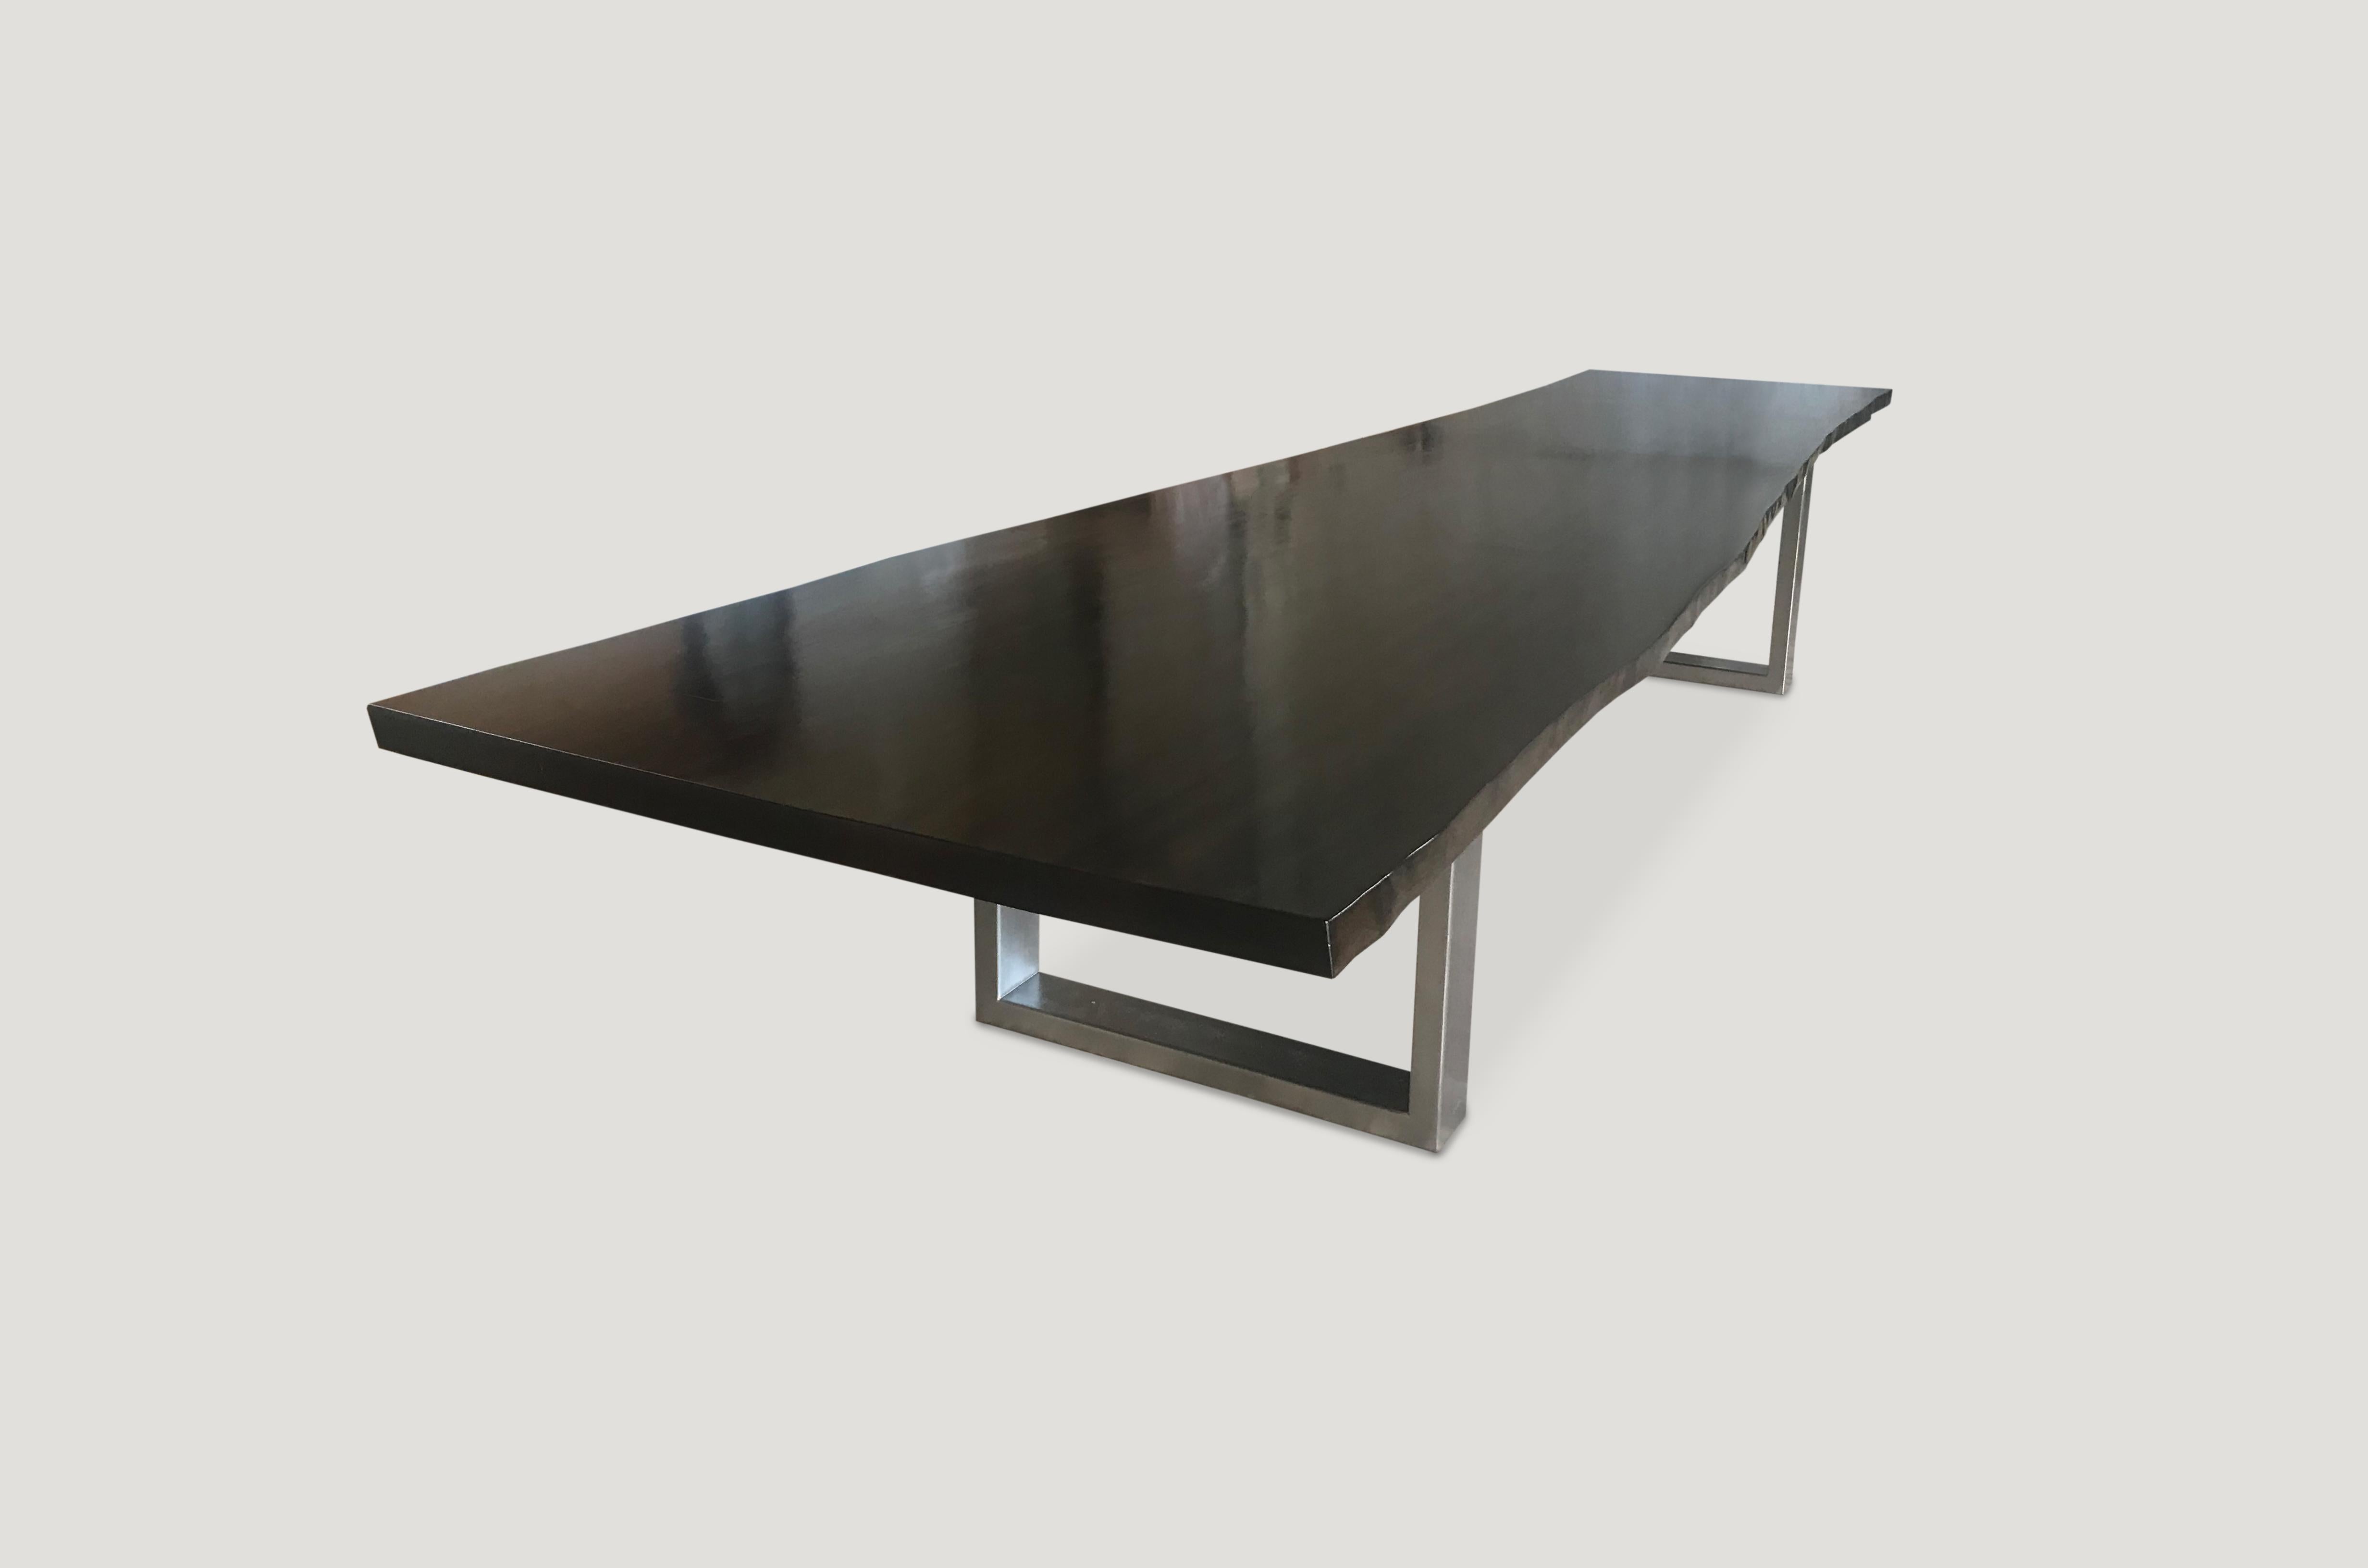 Impressive live edge dining table made from sycamore with a hand French polish finish and custom brushed stainless steel base.

Own an Andrianna Shamaris original.

Andrianna Shamaris. The Leader In Modern Organic Design™